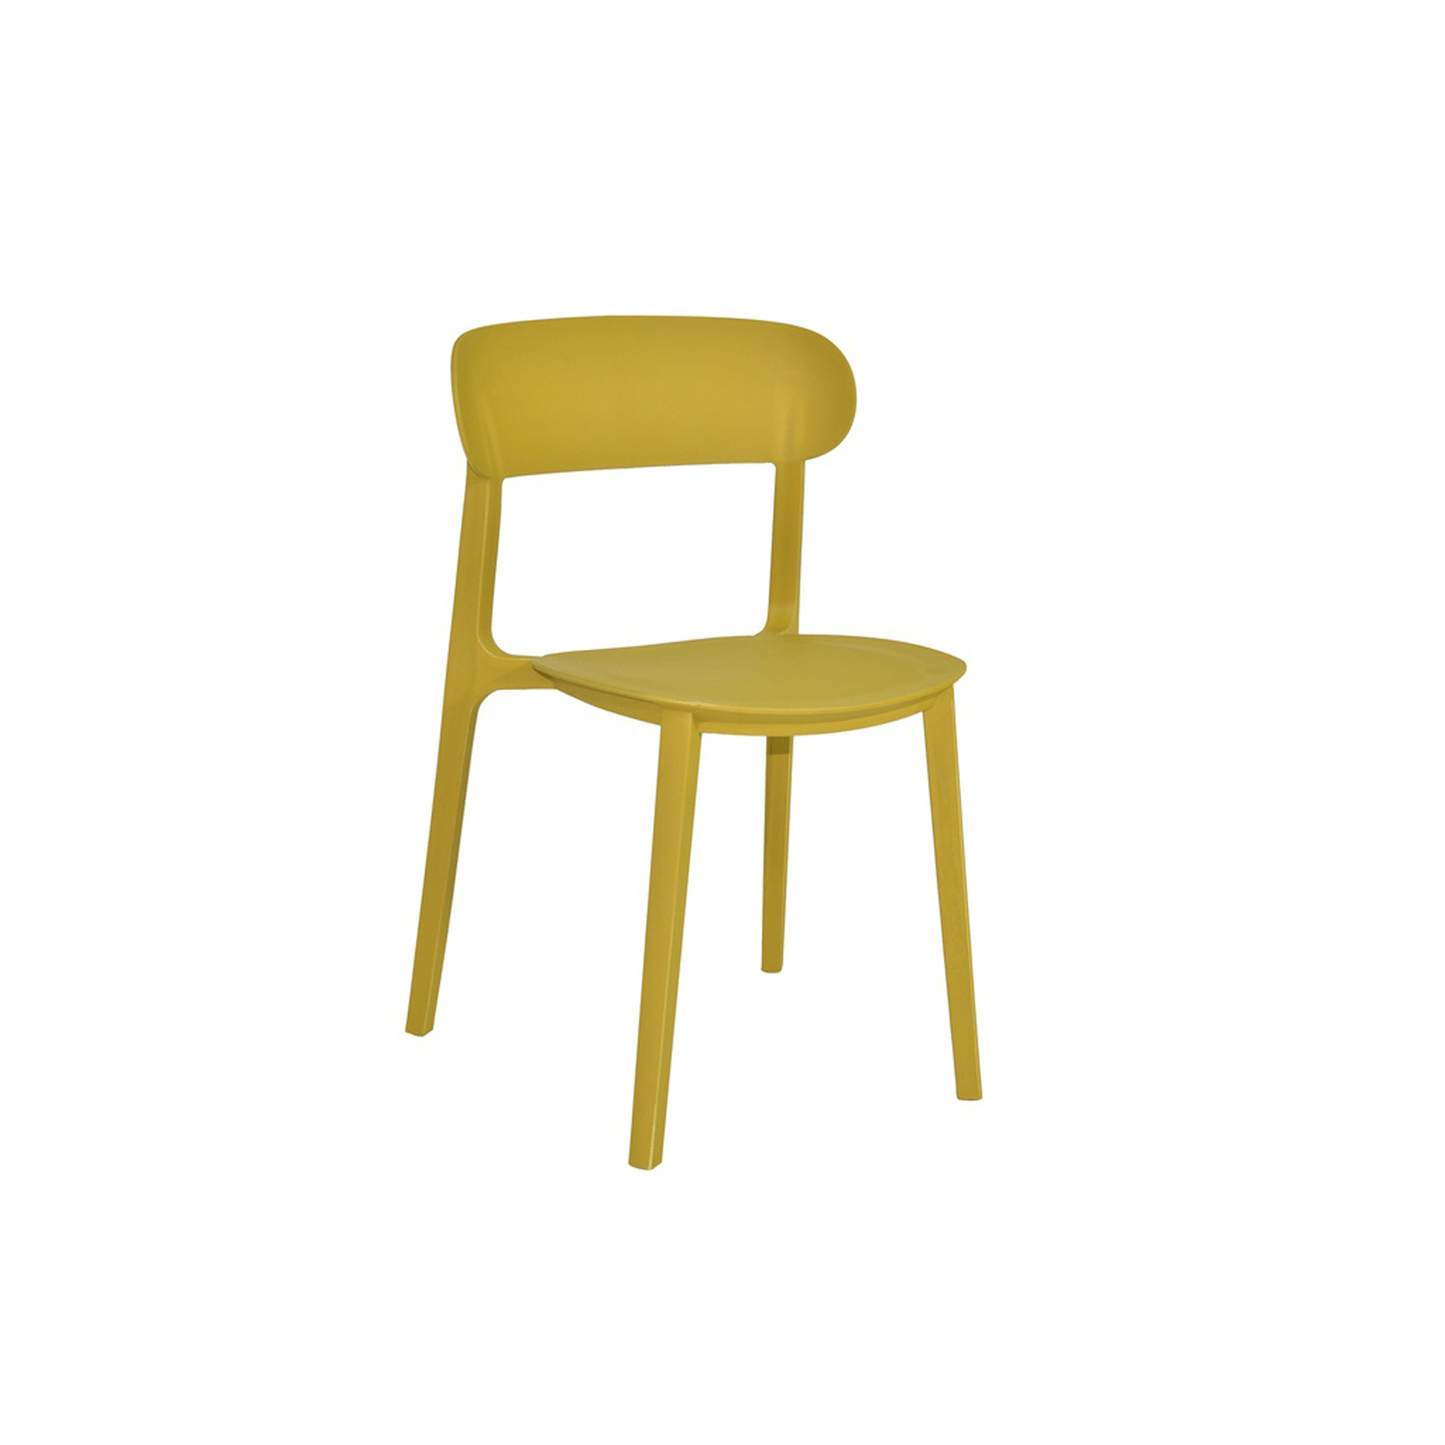 Simple Cafe Chair